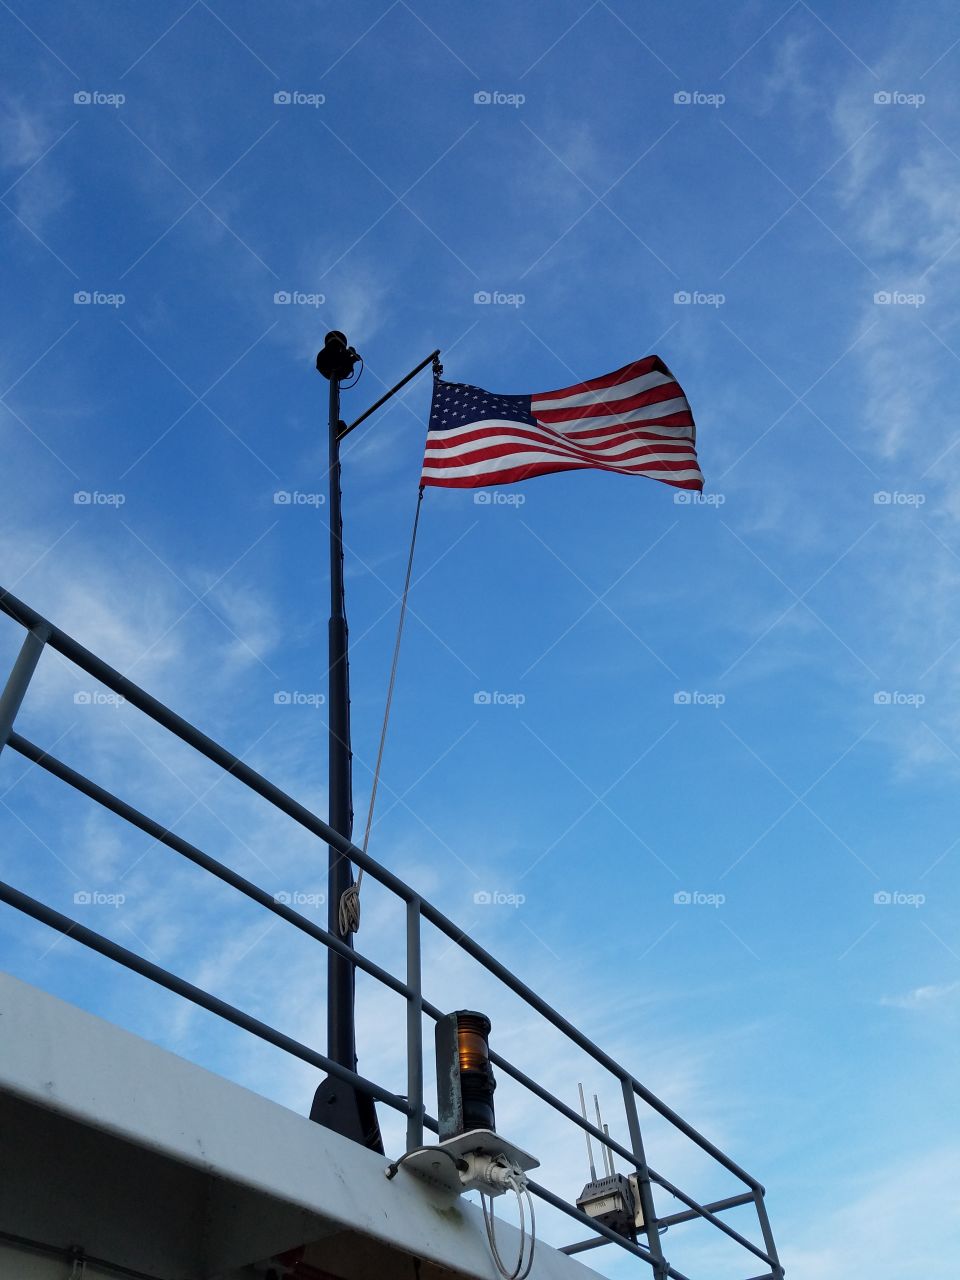 American flag on the mast of a boat